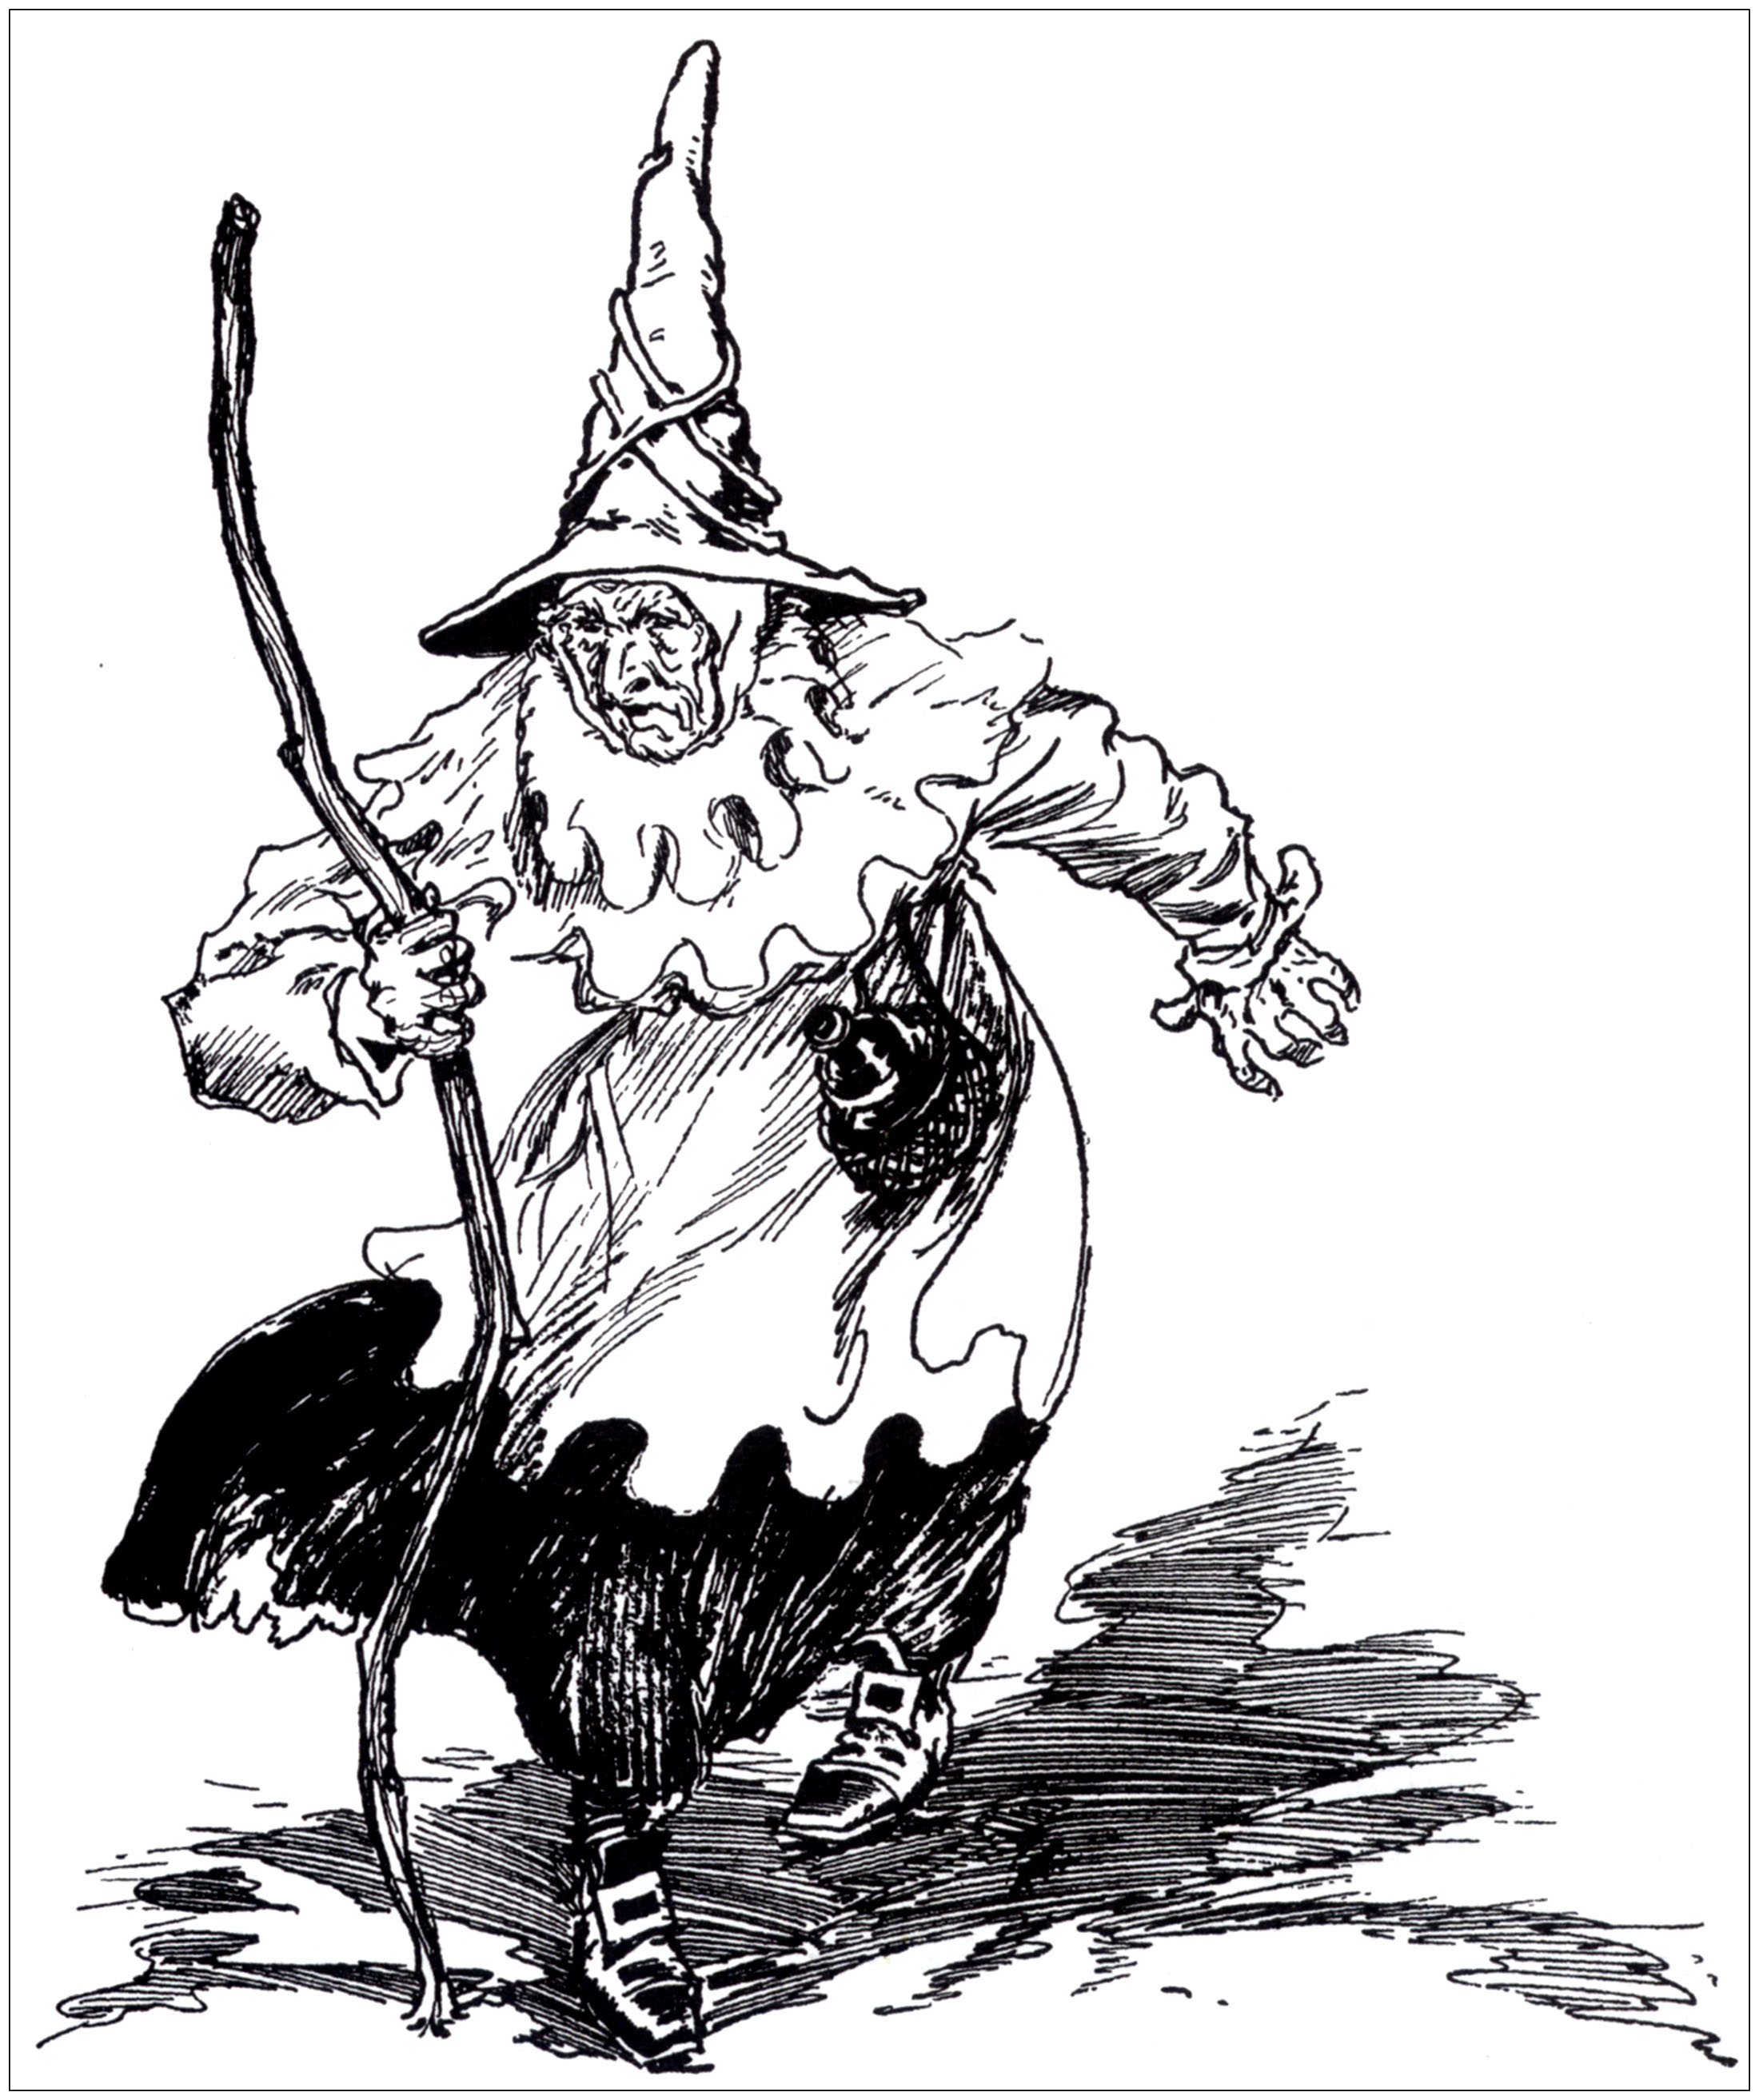 Scary old illustration representing a witch